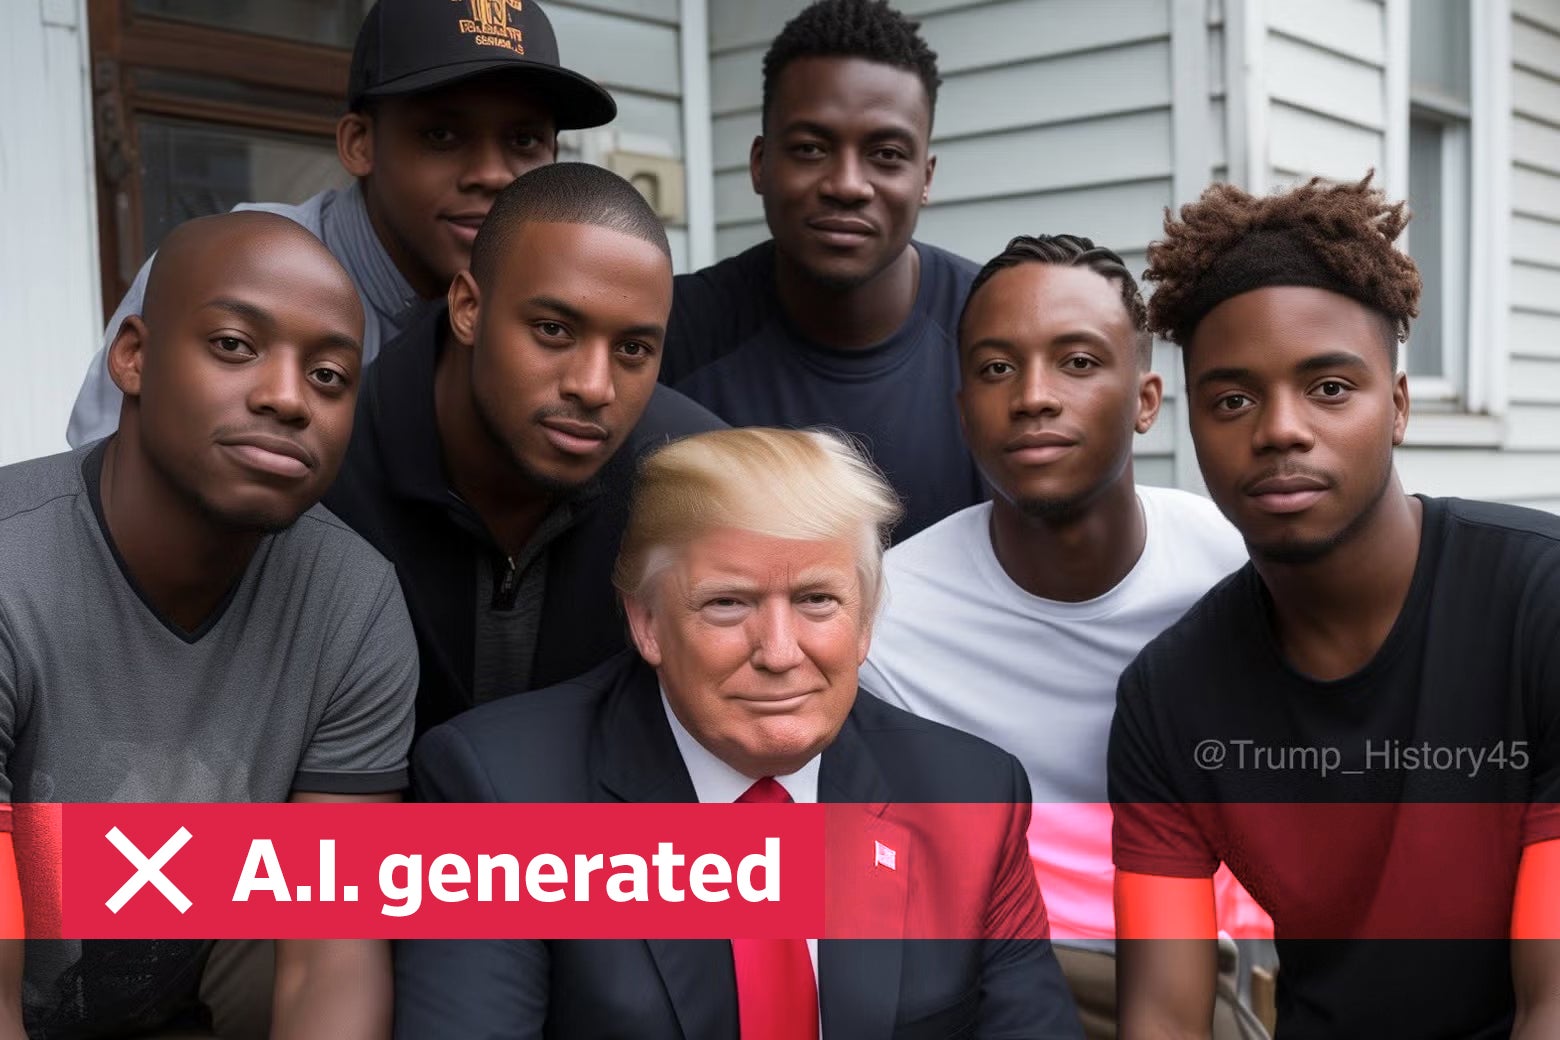 Donald Trump smiles surrounded by 6 young Black men who are also smiling. 